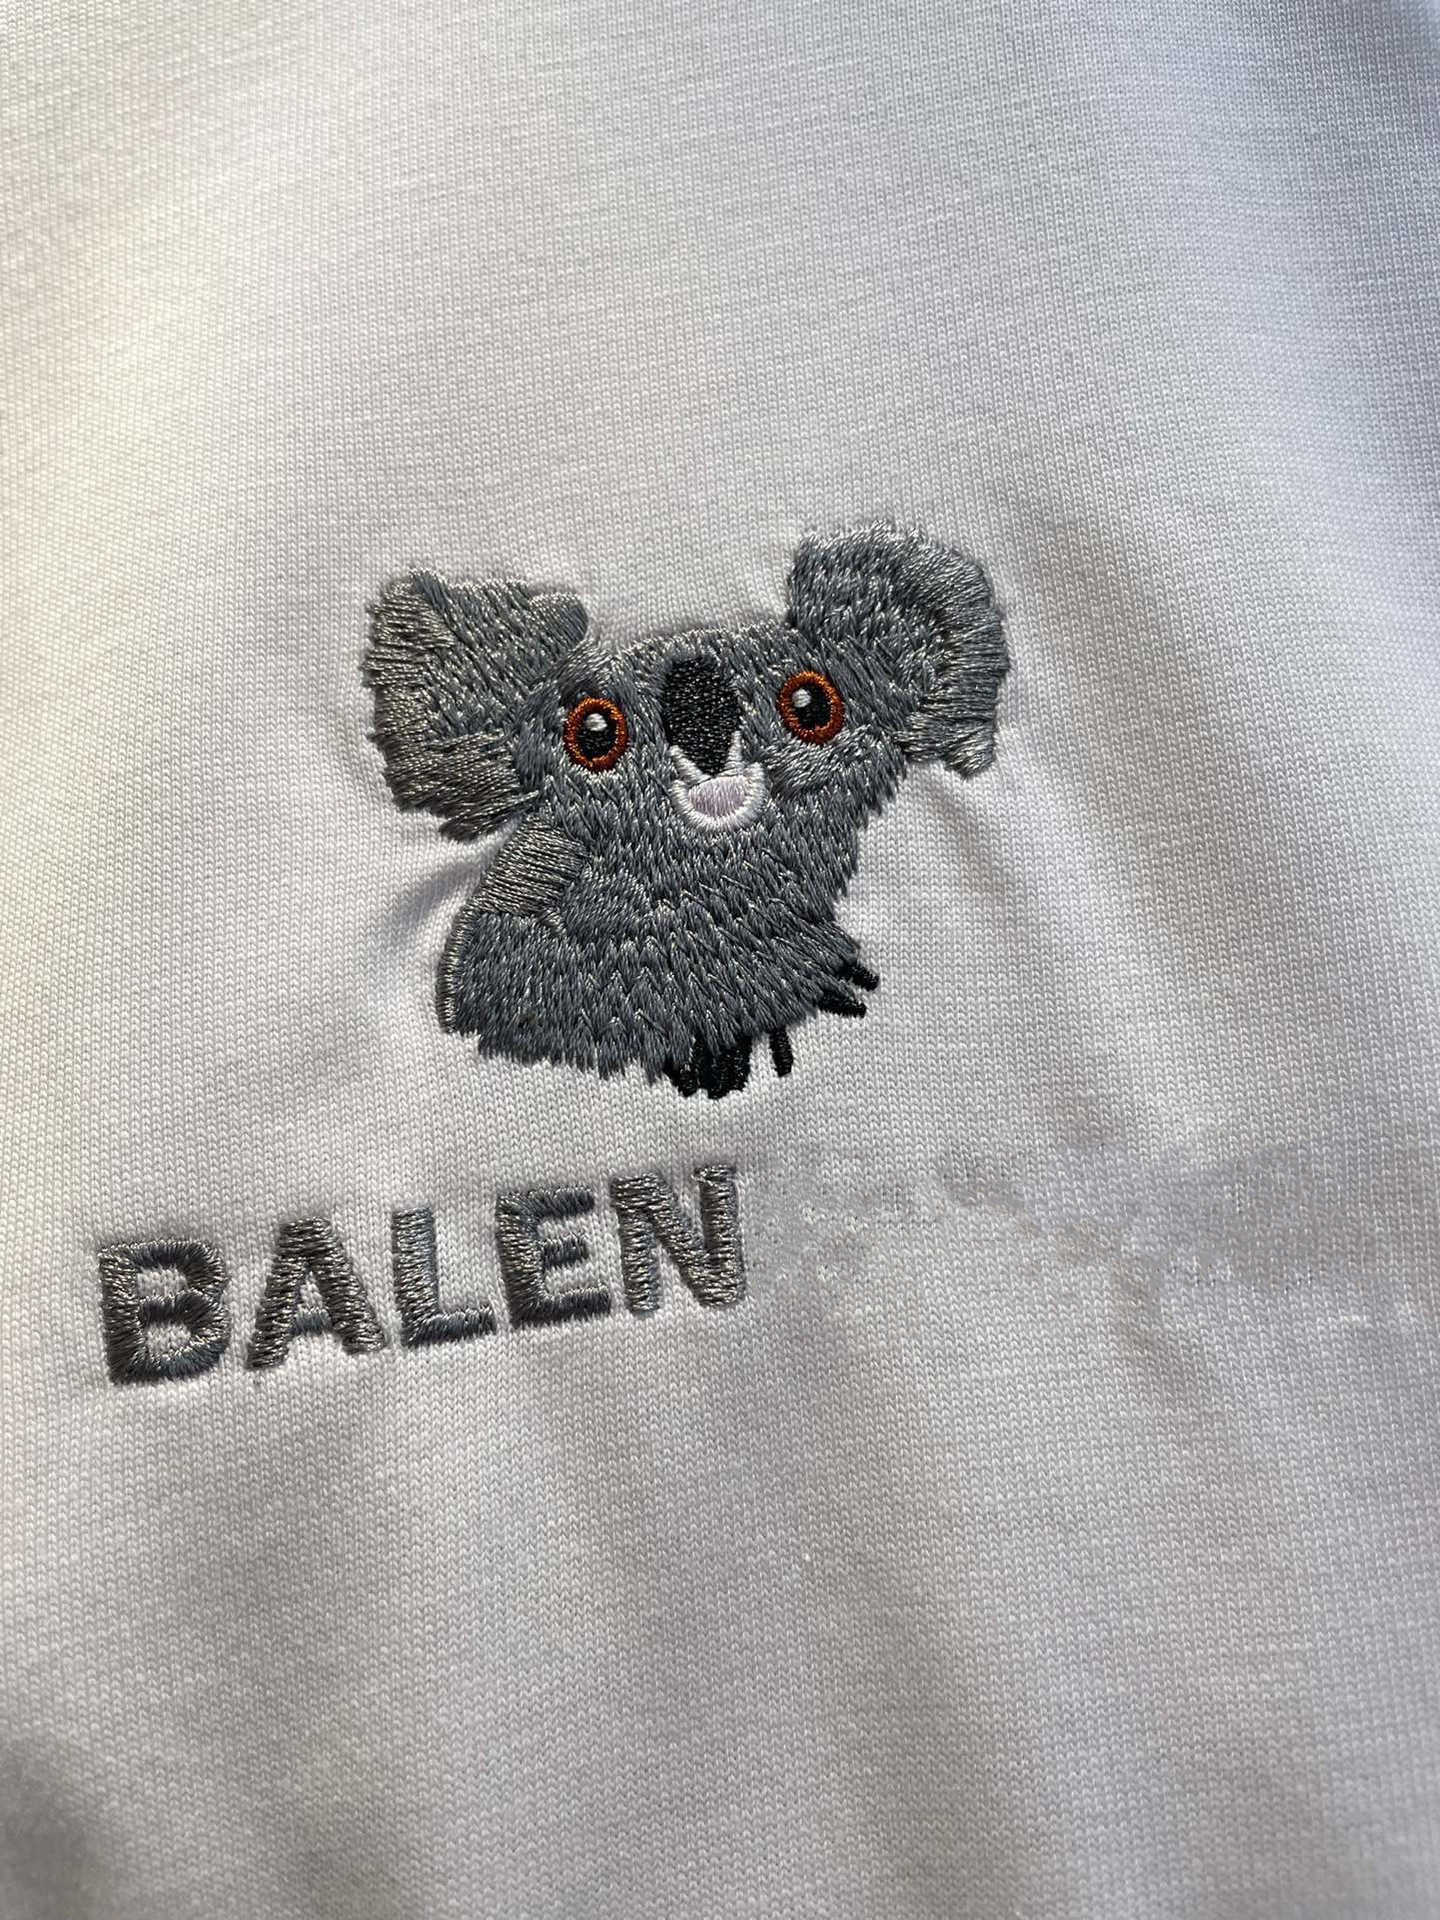 Designer new women t shirt Shirt High quality family charity exclusive sleeve T-shirt with embroidered koala bear front for men